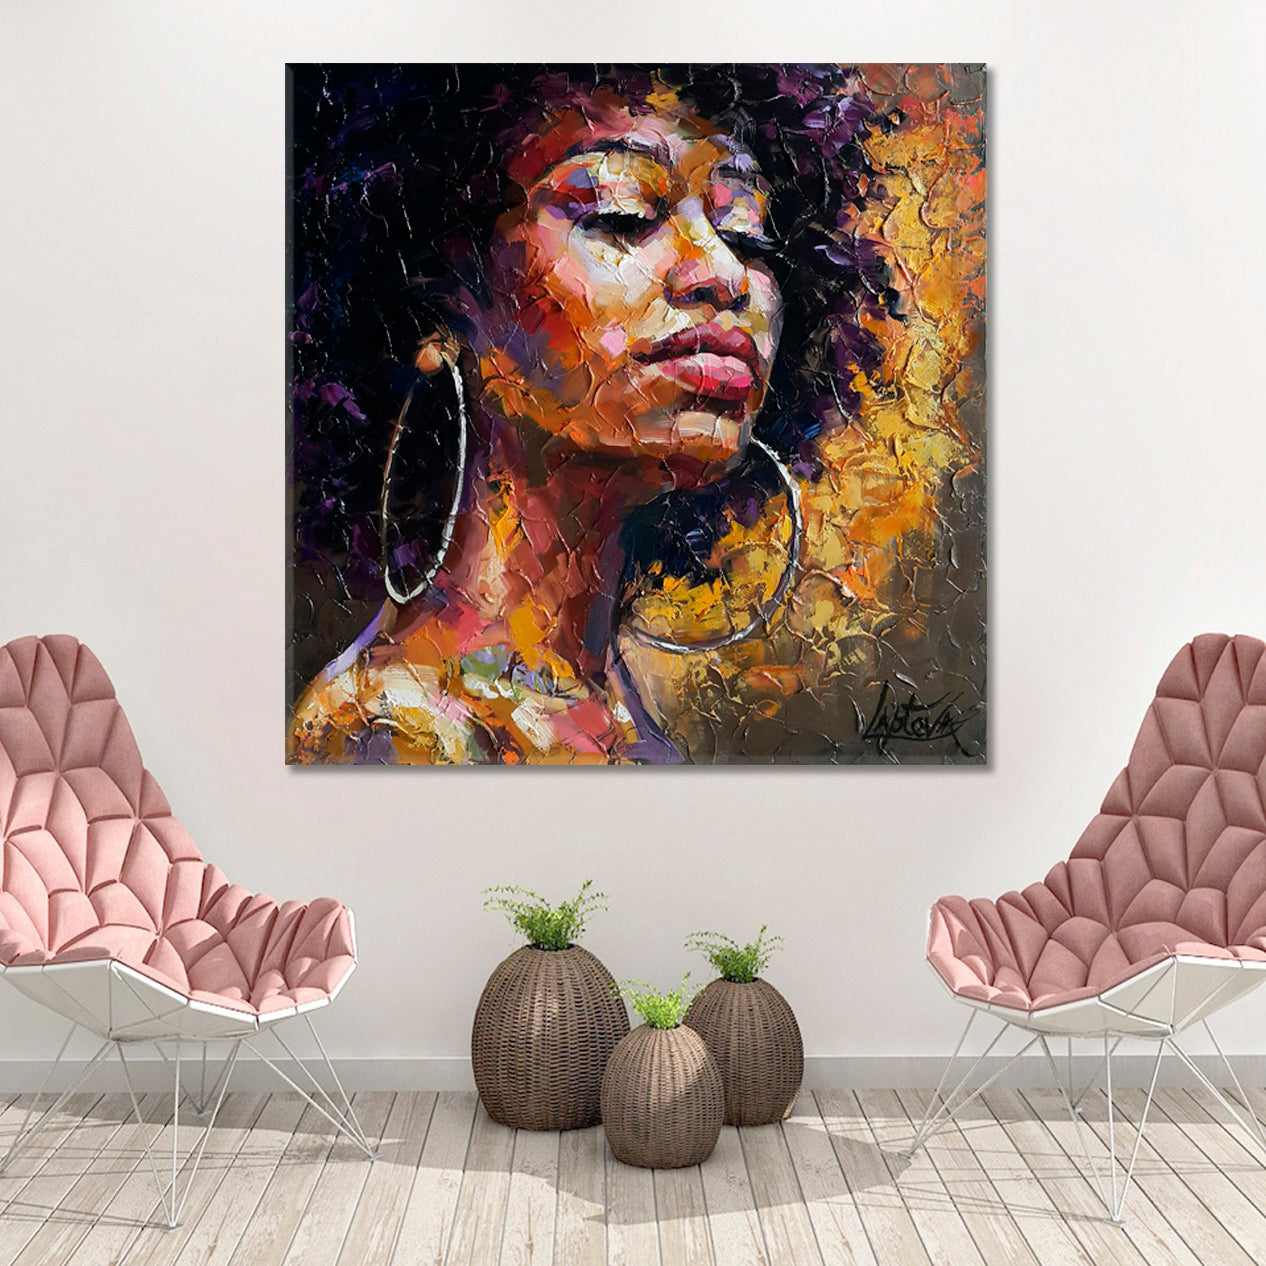 GODDESS COURAGE  Female Inner Beauty and Wisdom African Woman - Square Panel African Style Canvas Print Artesty 1 Panel 12"x12" 